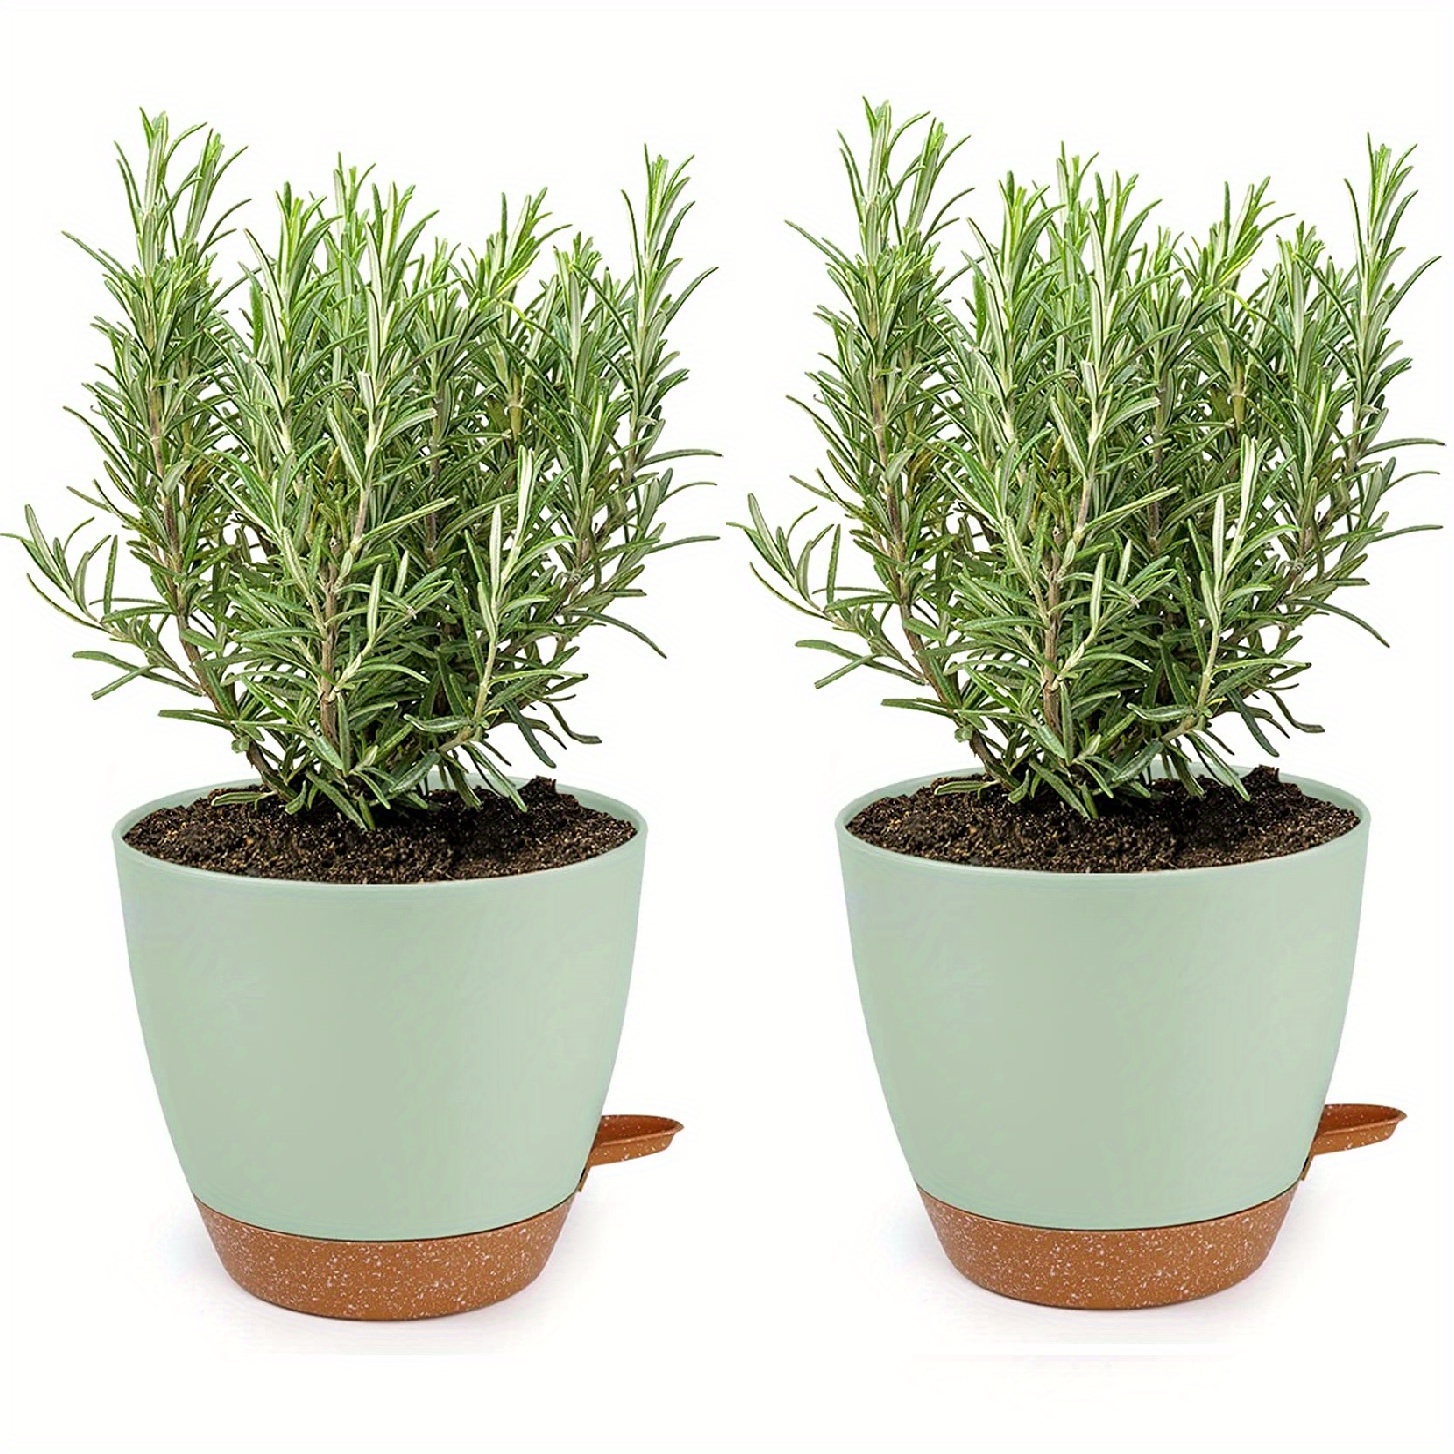 Faux Outdoor Greenery -Artificial Outdoor Plants & Flowers